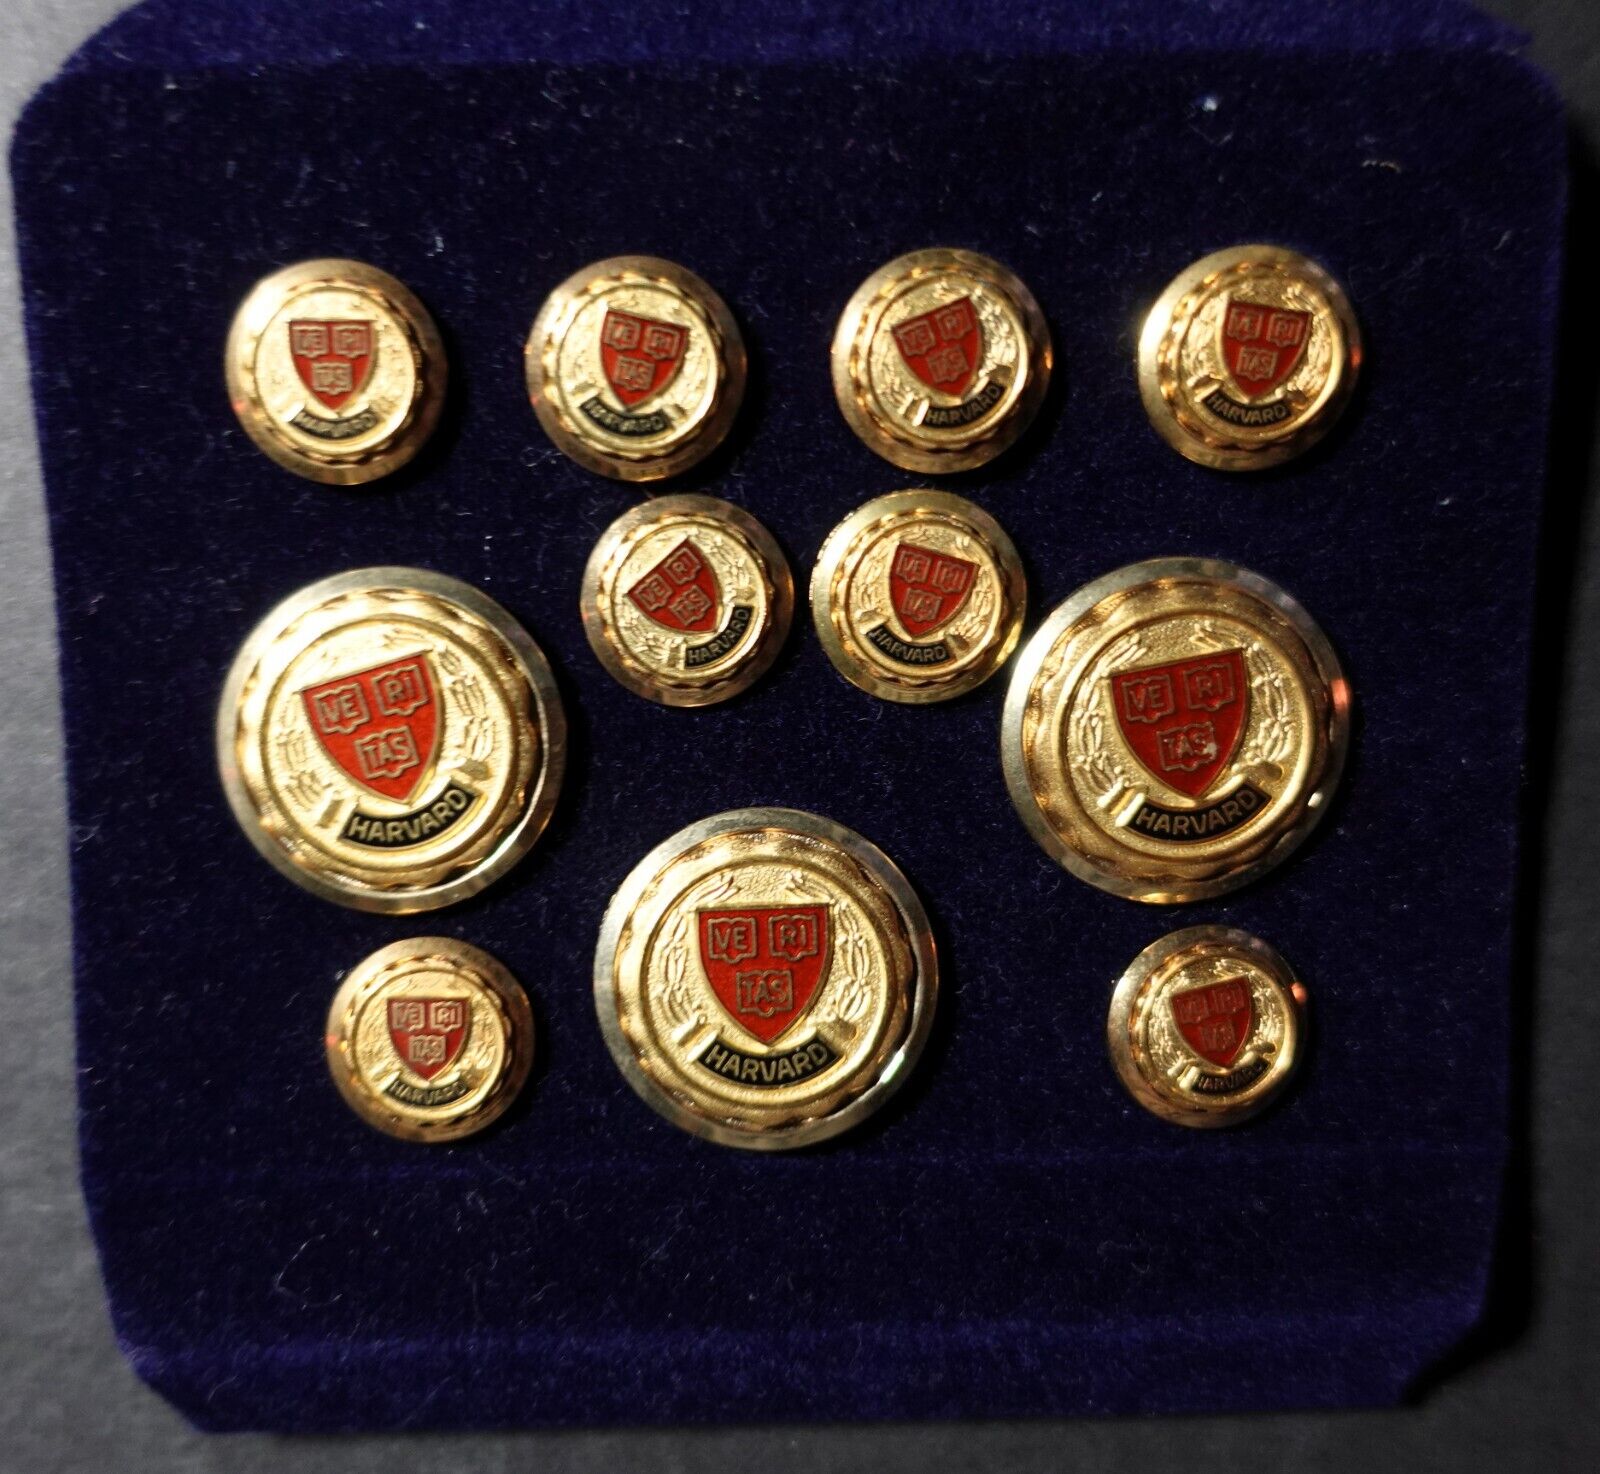 Harvard University Crest 11 Button Set Gold Plated Extremely Rare Find